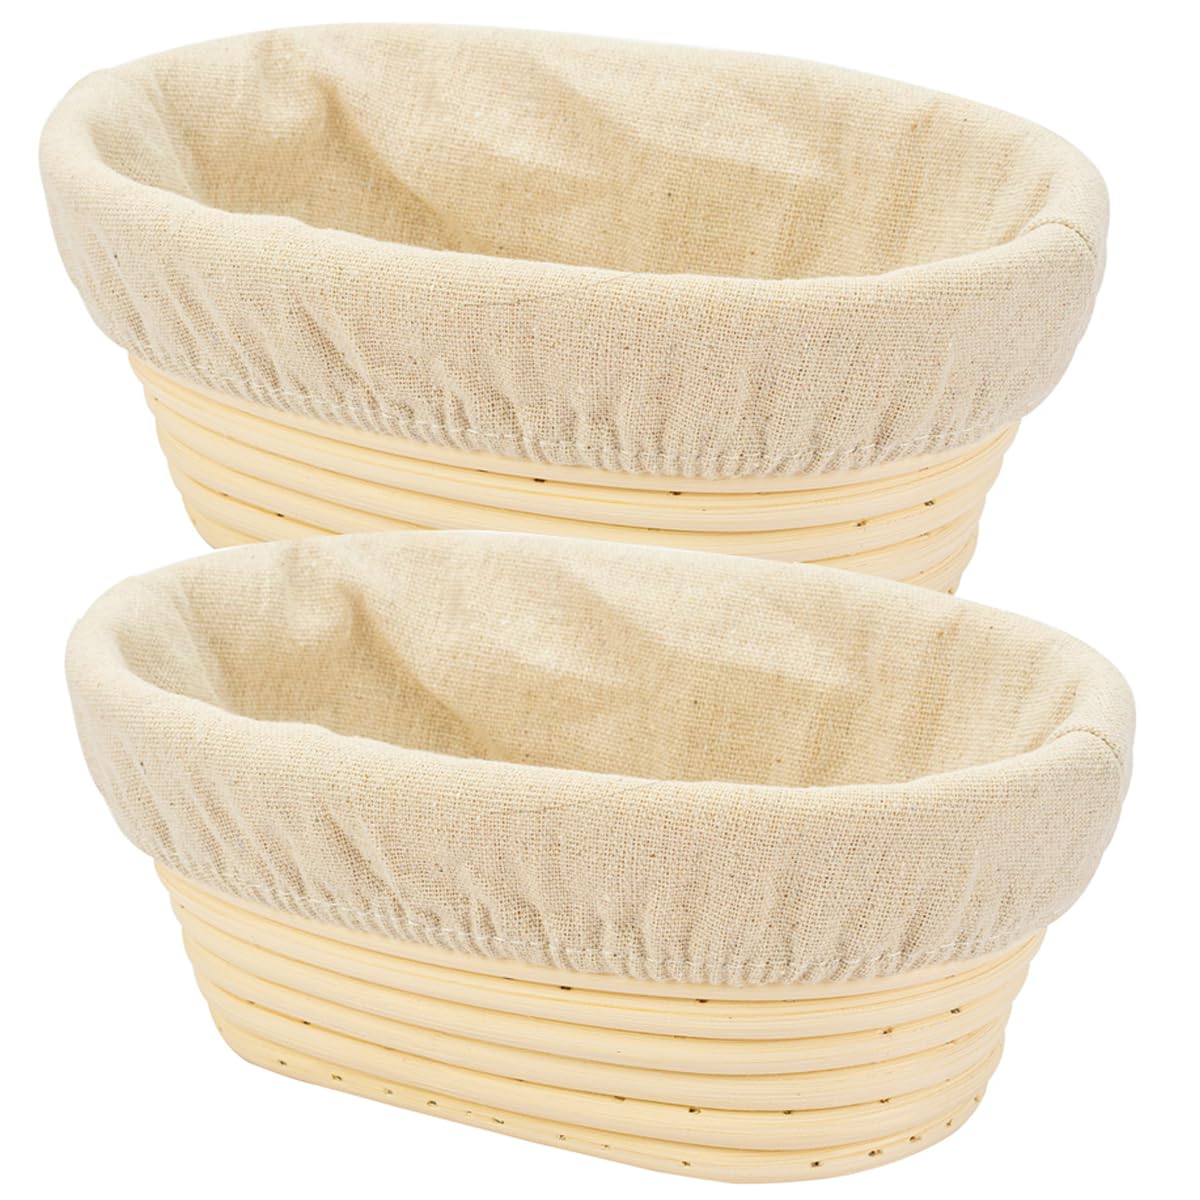 2 PCS 8 inch Oval Long Banneton Brotform Bread Dough Proofing Rising Rattan Basket & Liner for Professional & Home Bakers